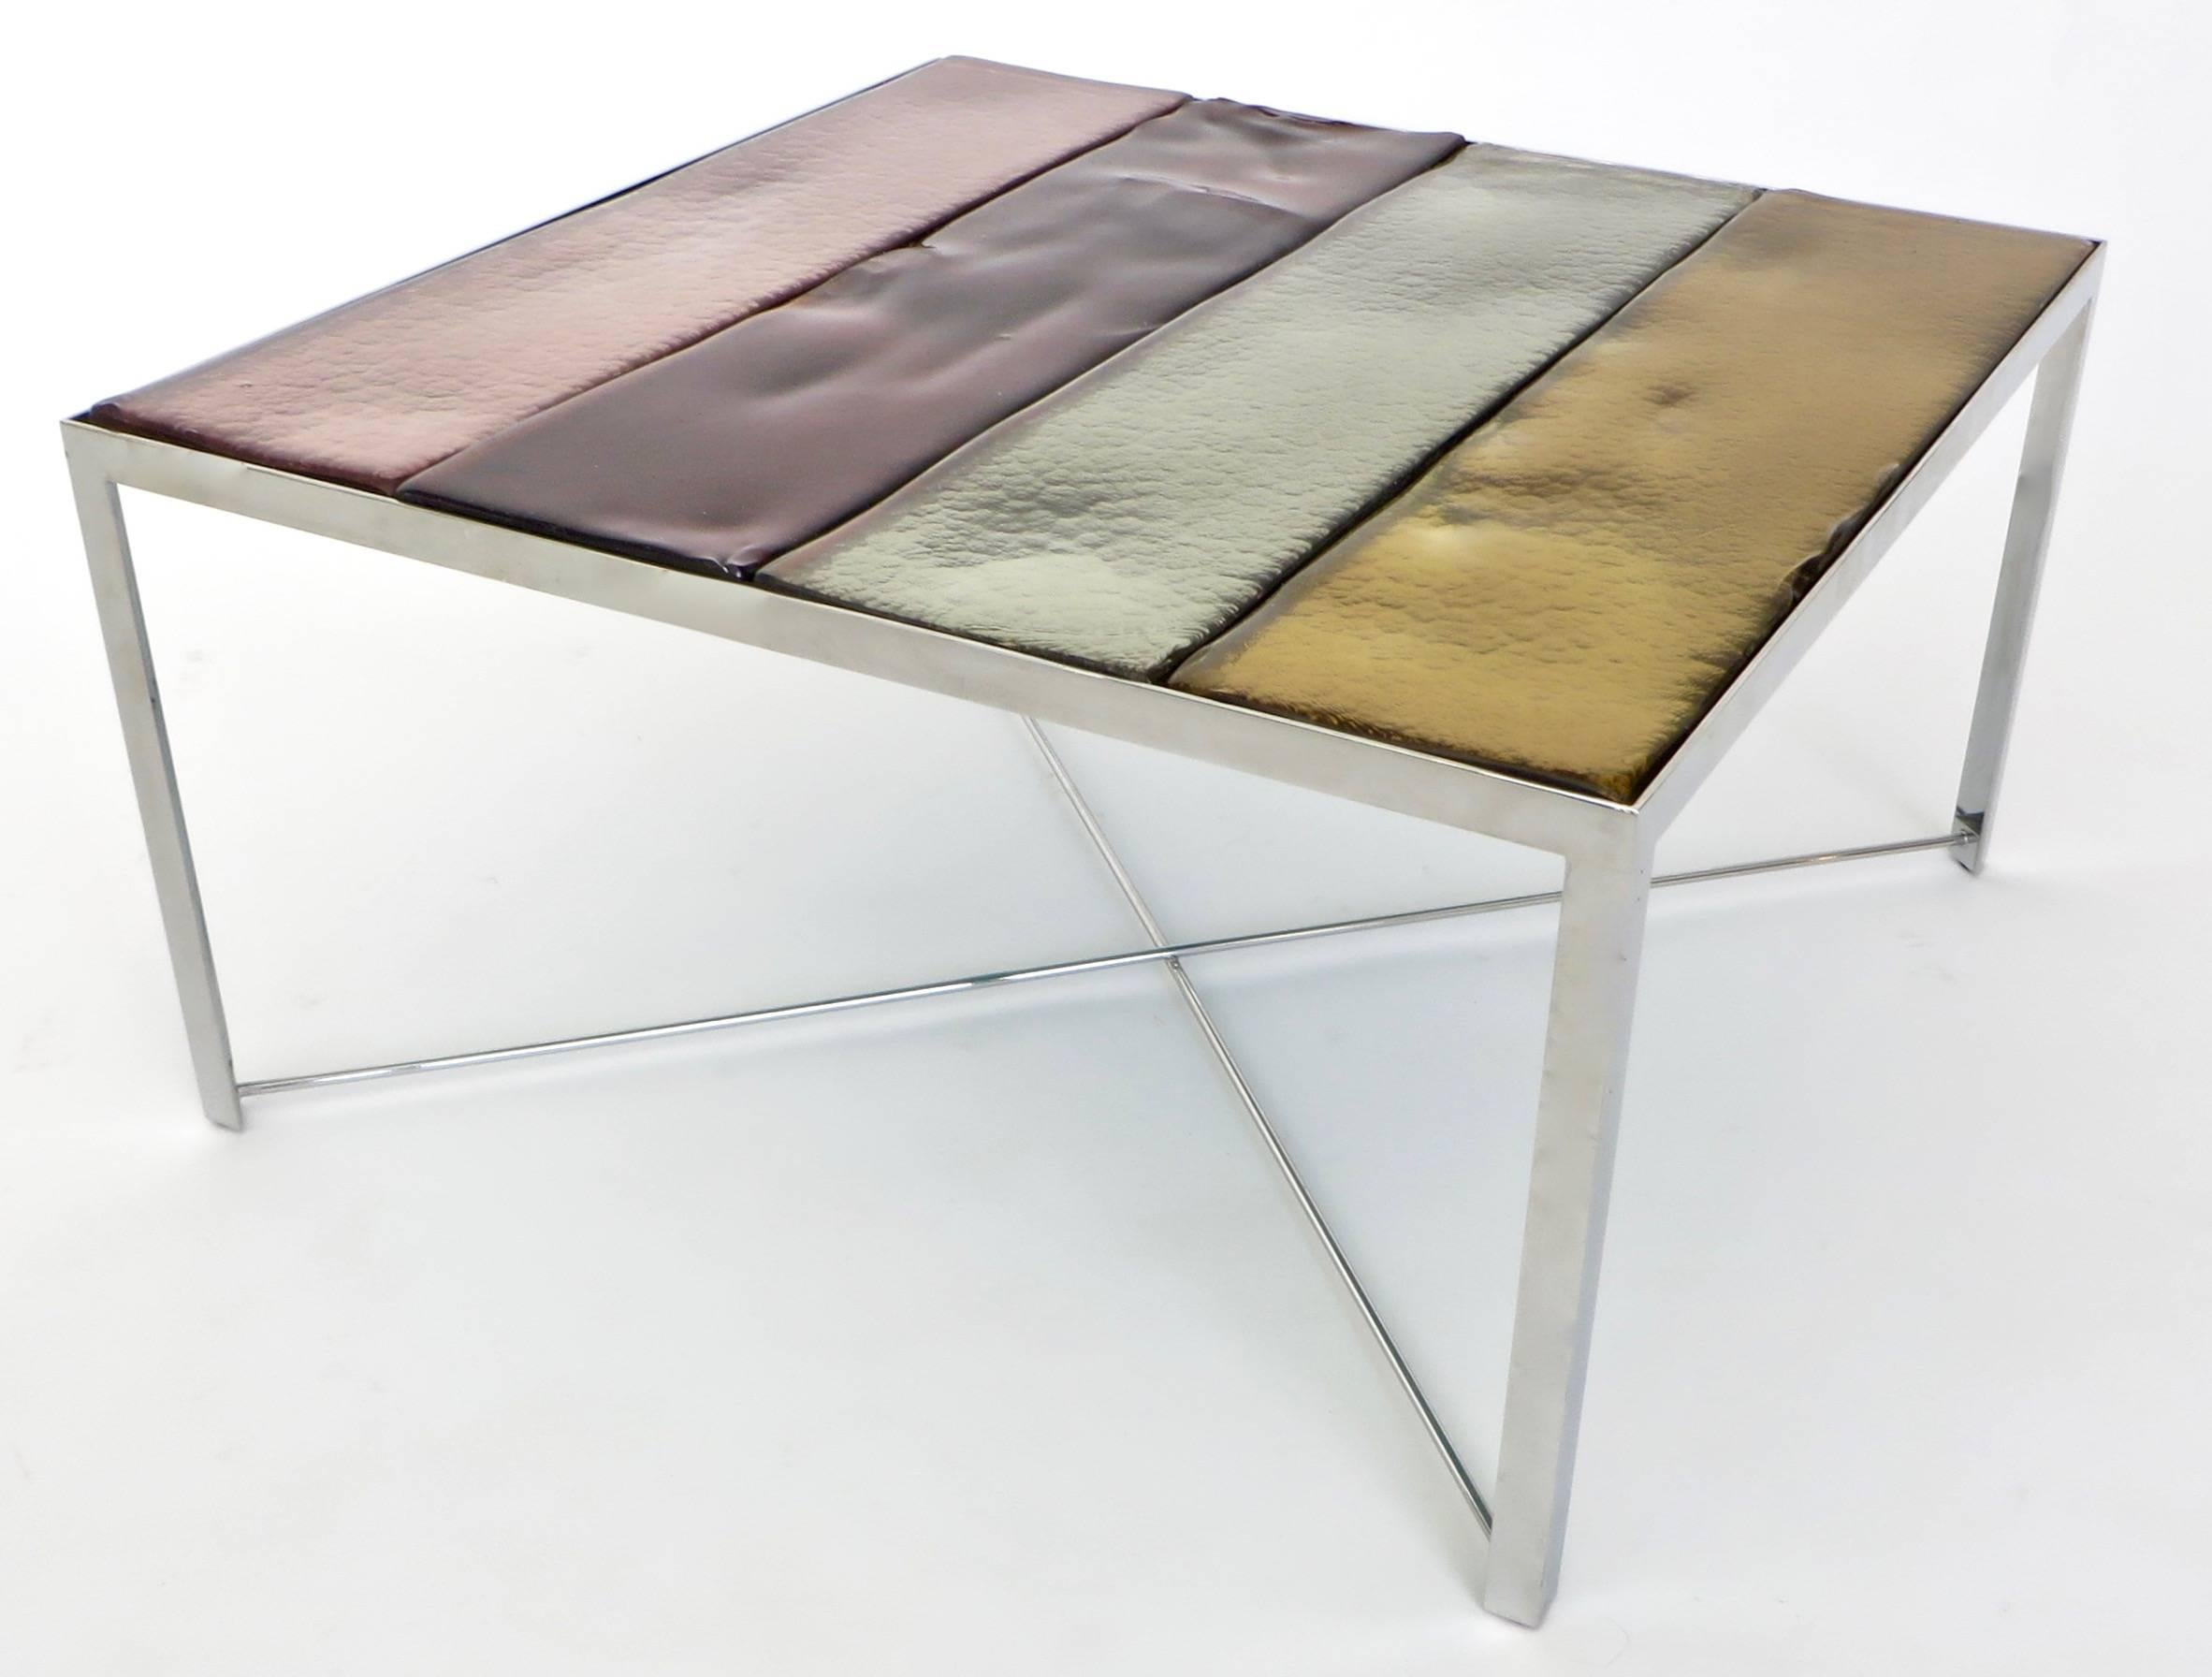 Mingus side or coffee table by Rudolfo Dordorni for Venini & Co, Murano Italy, 2000. 
This table was part Venini's debut Quintet Furniture collection. 
Chrome-plated steel with cast glass panels in four beautiful vanini colors.
Undulating subtle